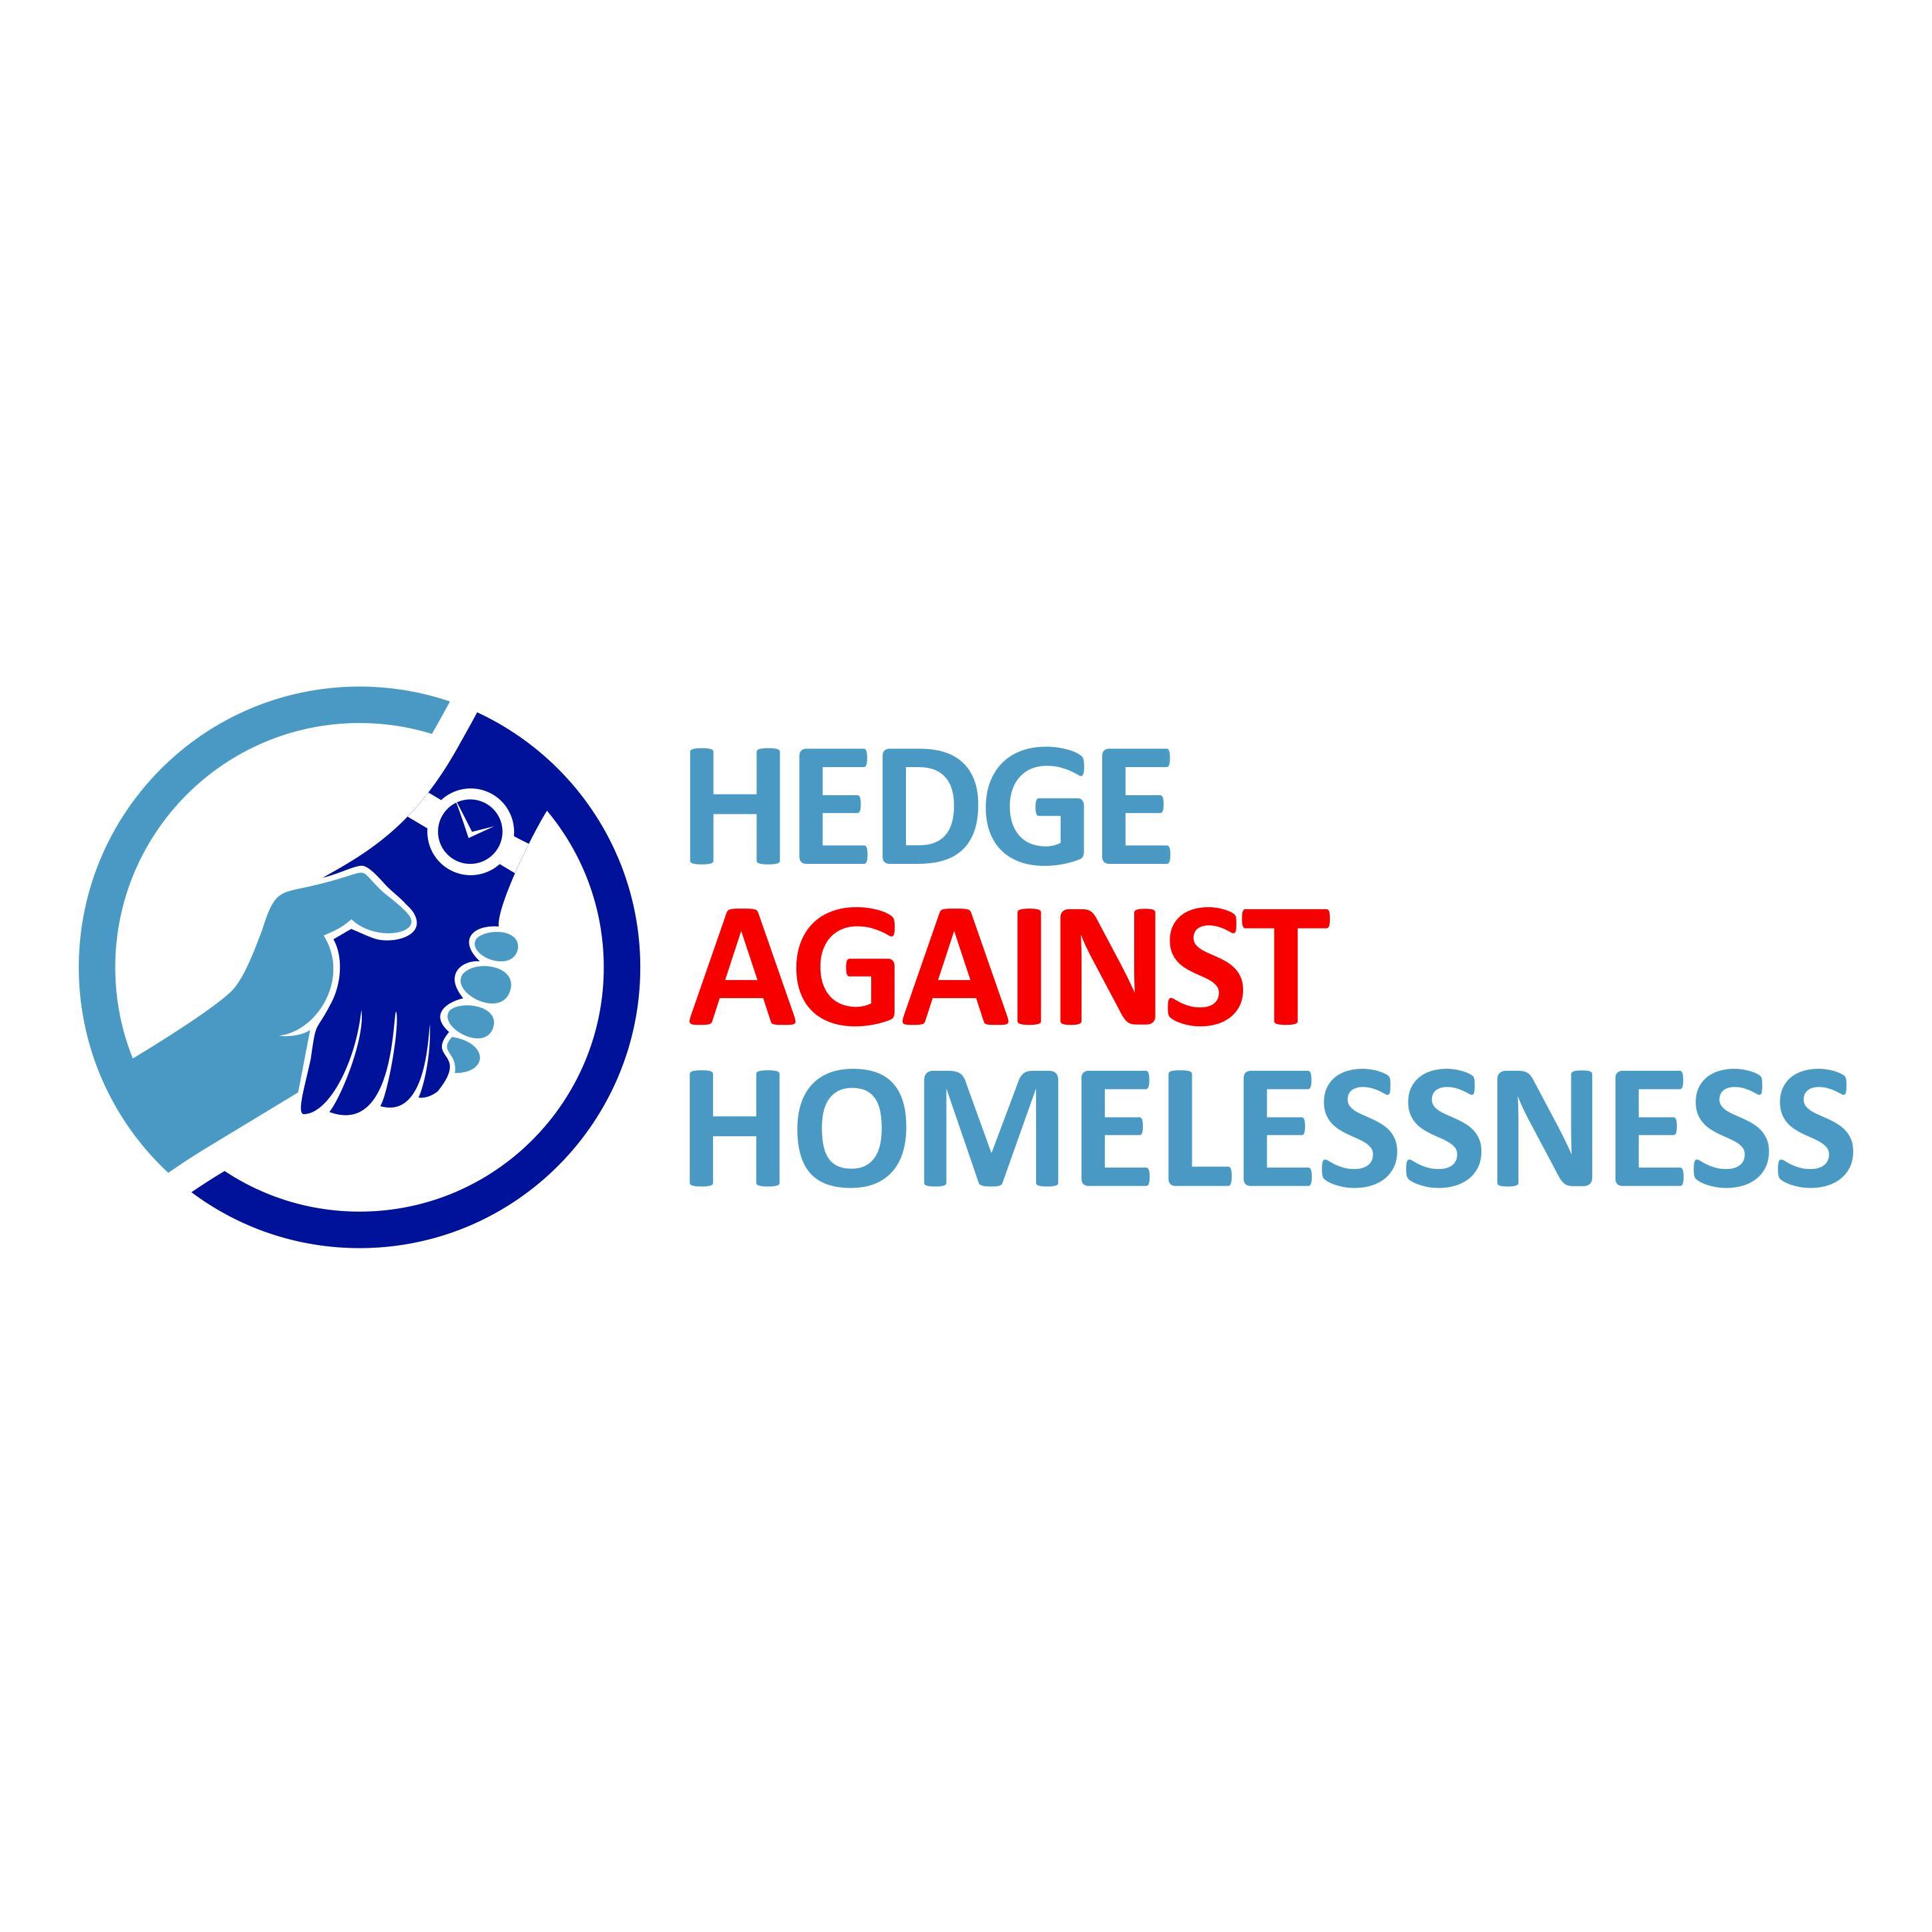 Hedge Against Homelessness partners with the most effective organizations around Central Florida  that are focused on fighting homelessness.